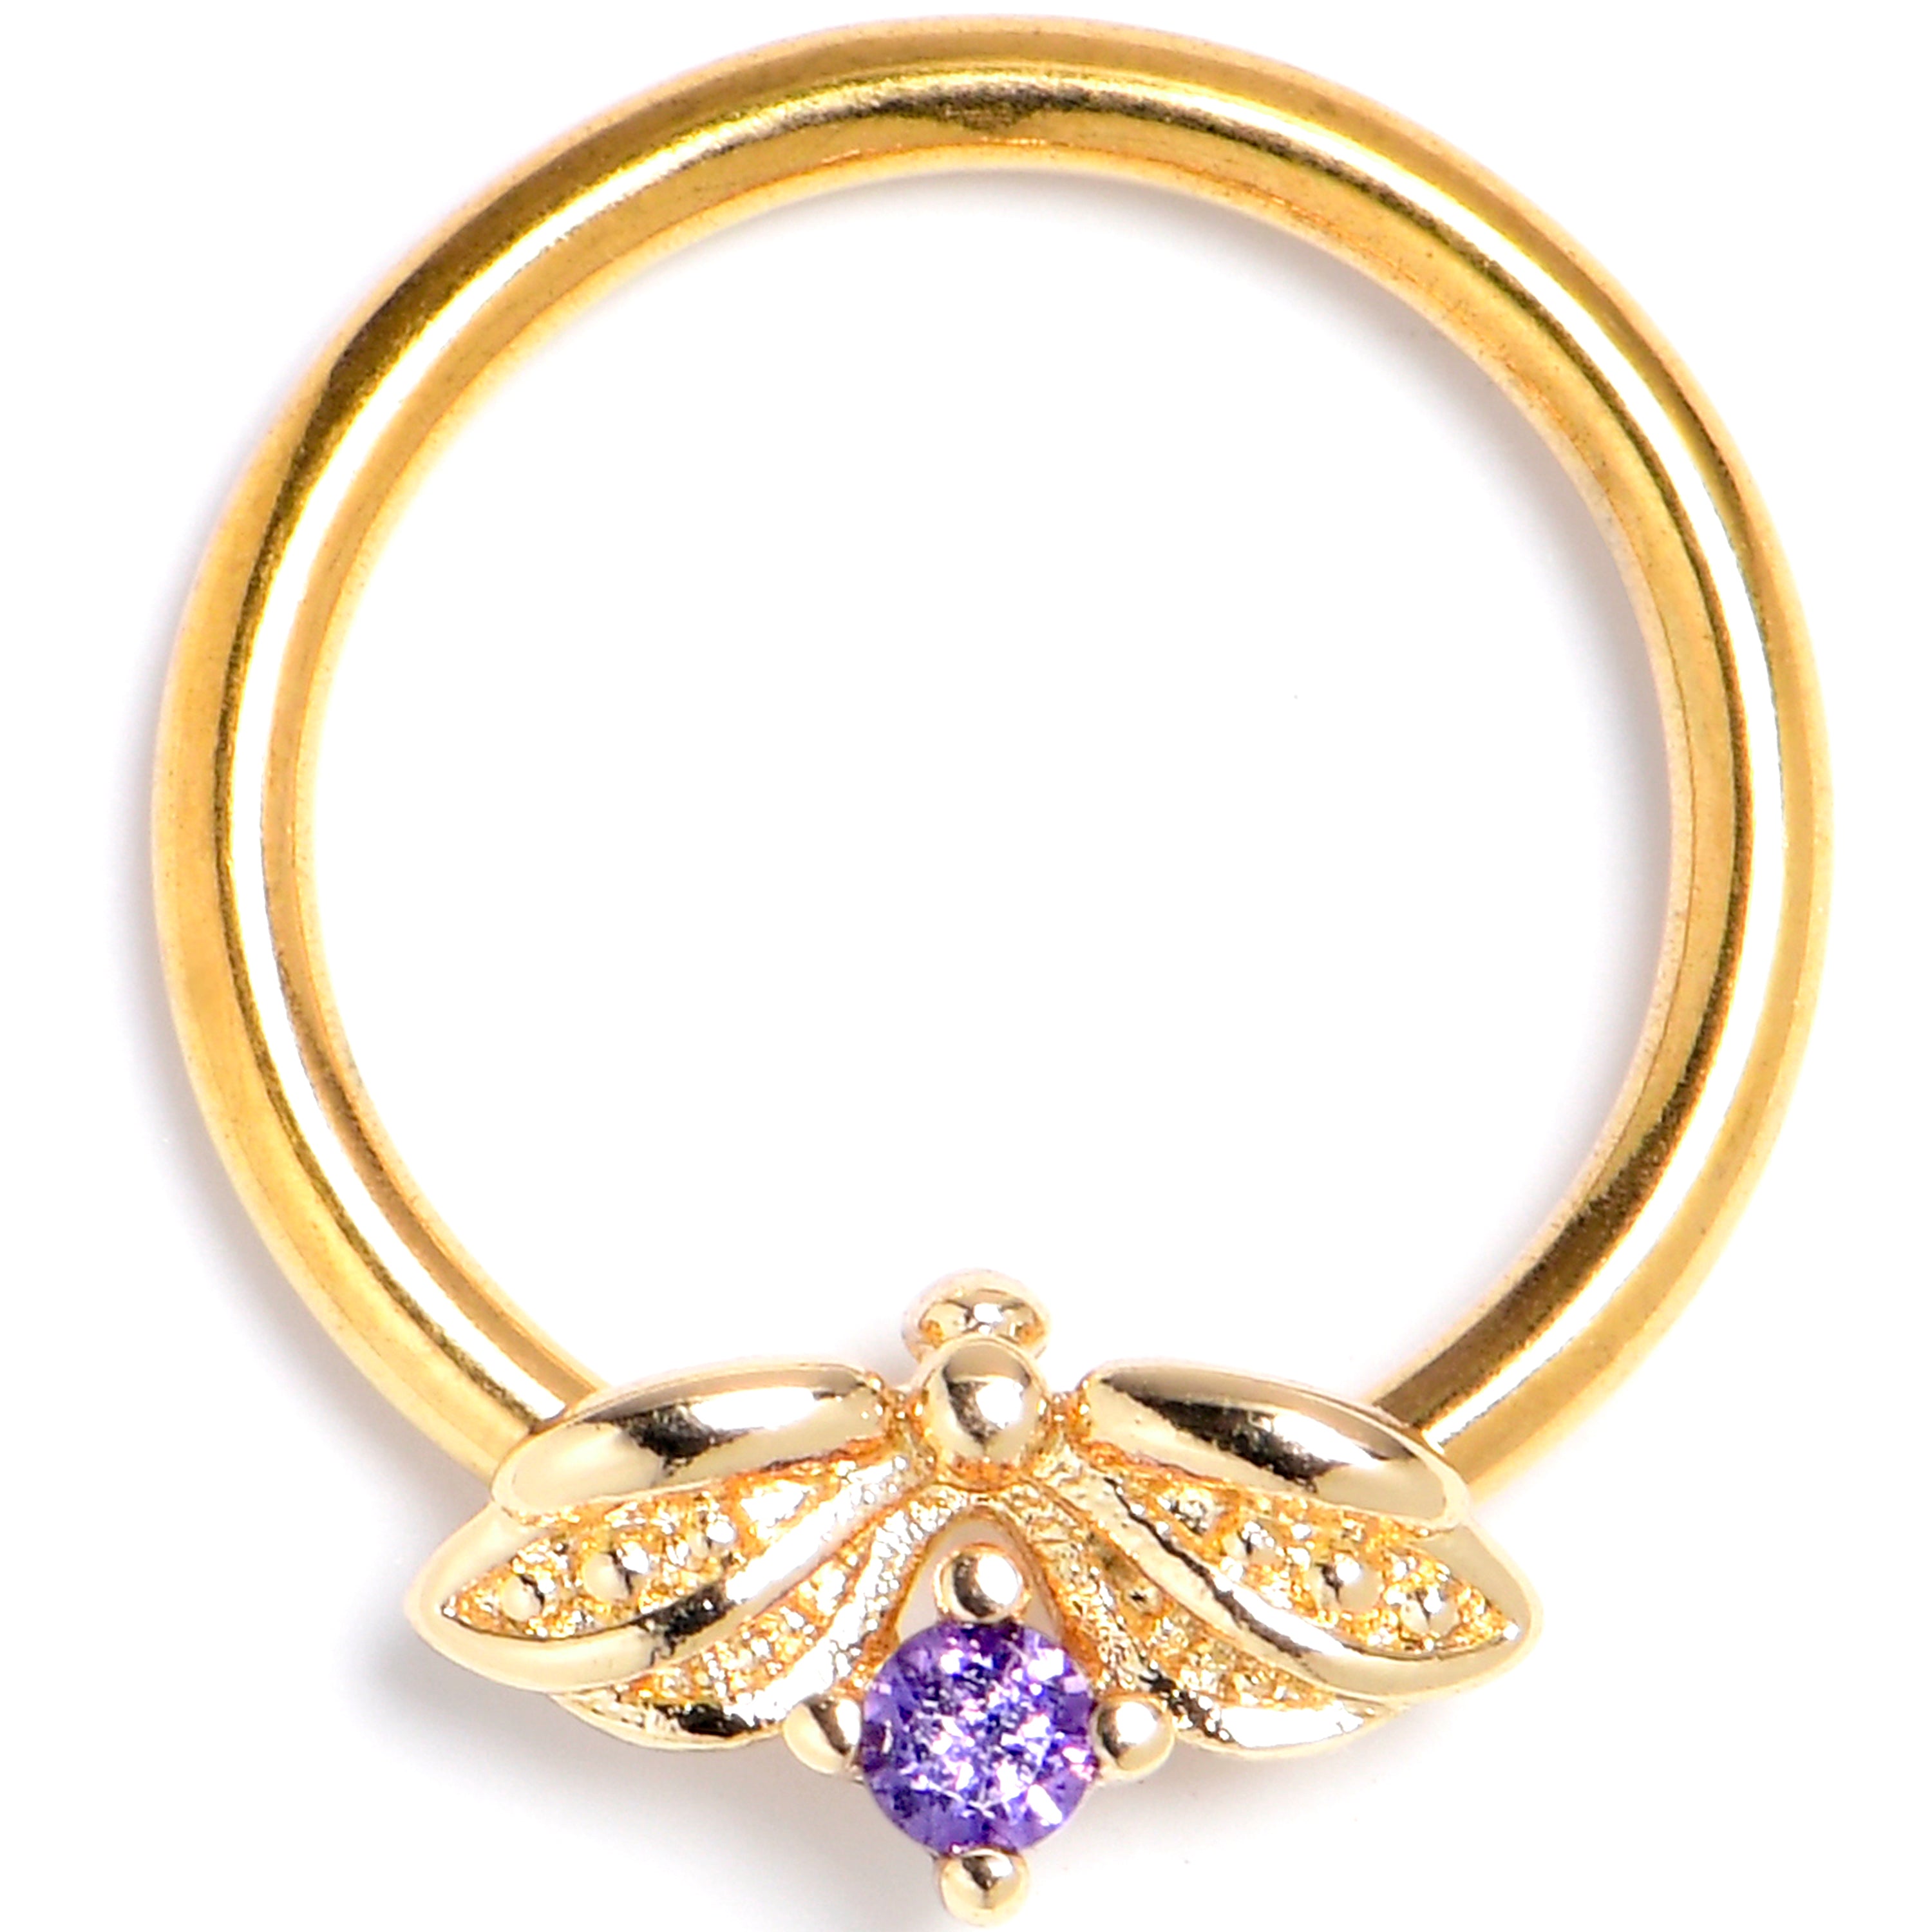 16 Gauge 3/8 Purple Gem Gold Tone Beauty Bug Insect BCR Captive Ring